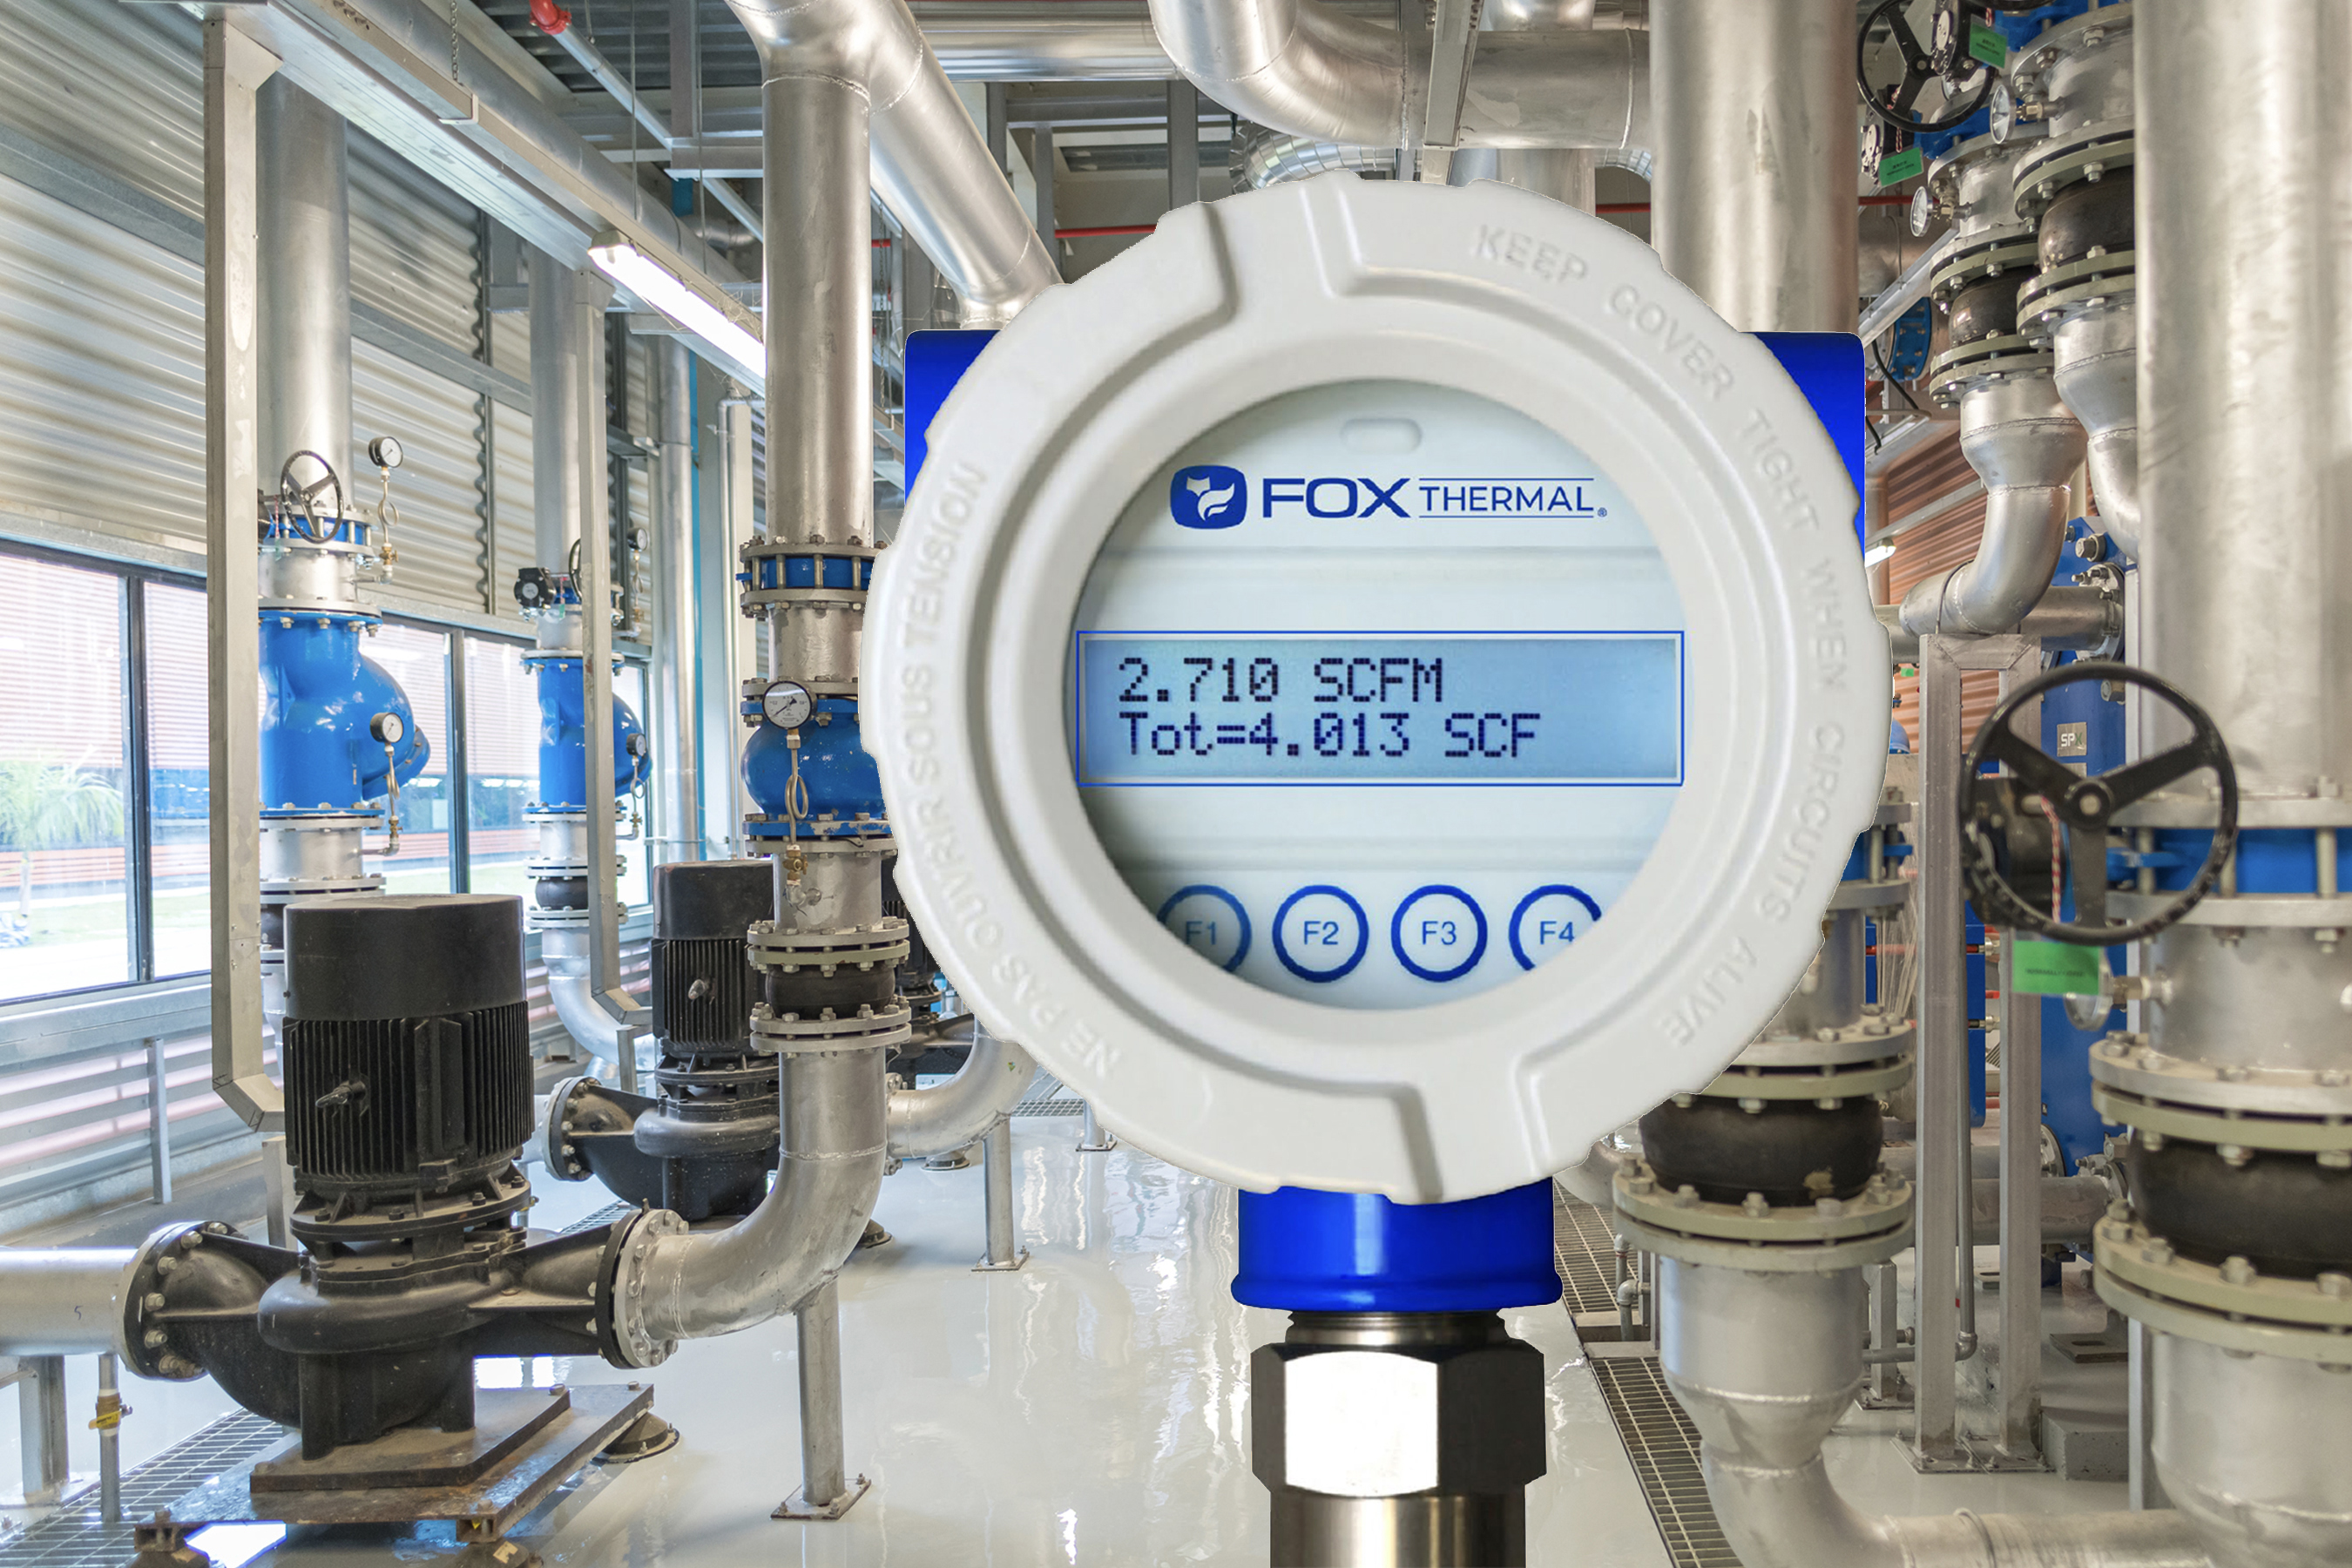 Compare thermal mass flow meters by model type